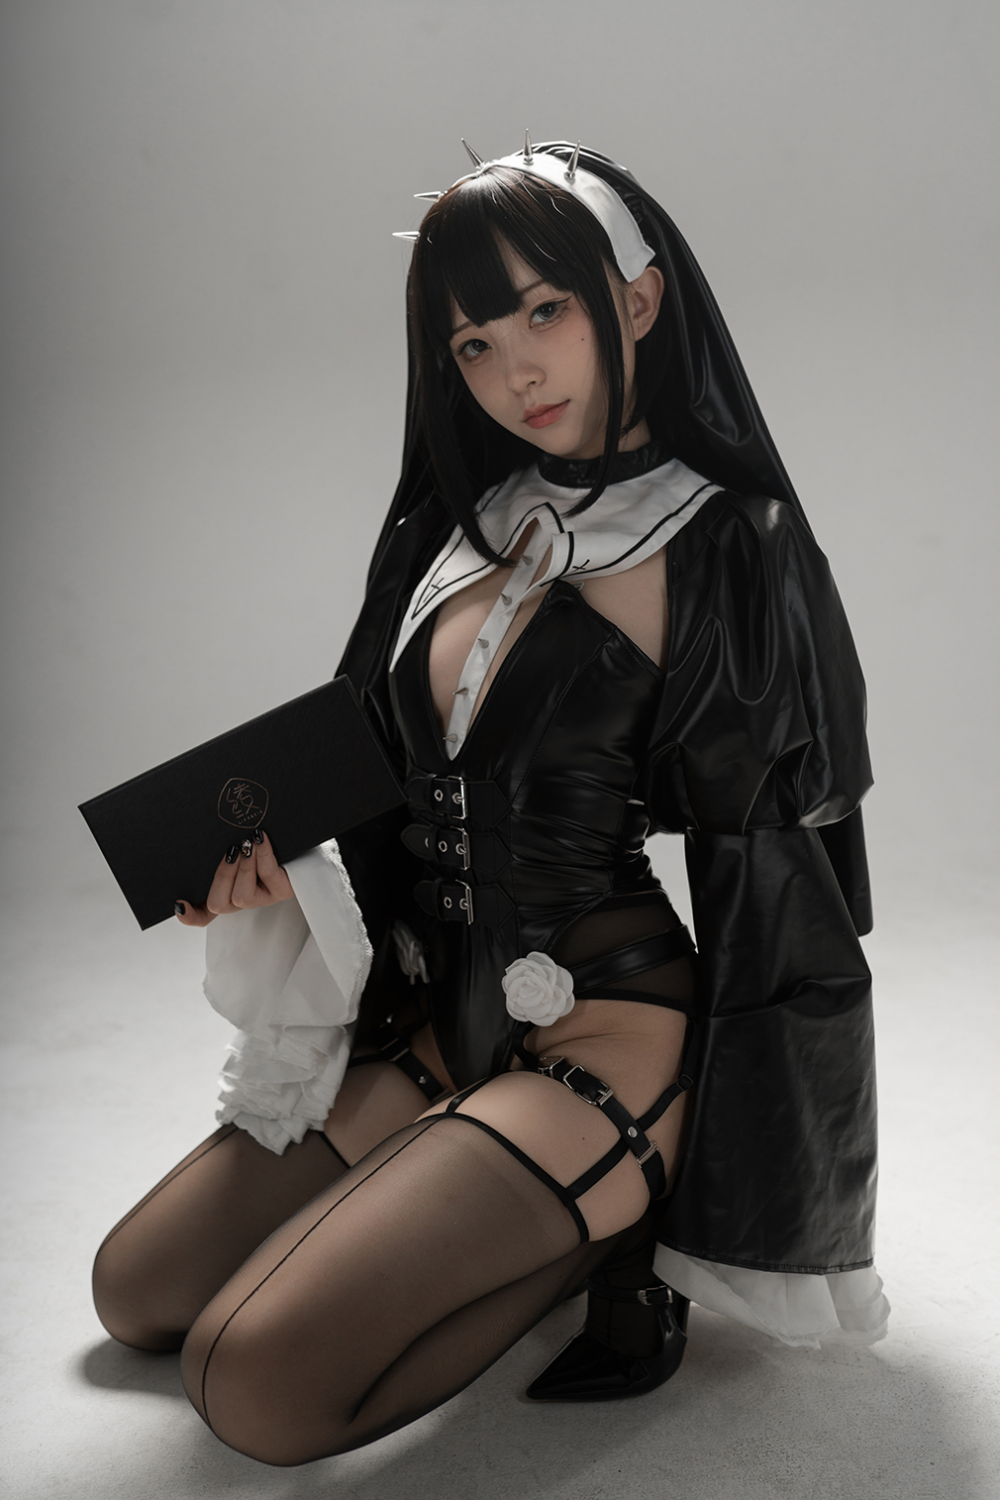 Hot Cosplay Girls Porn - Cosplay Anime Asian Girl with Hot Lingerie - Porn - EroMe